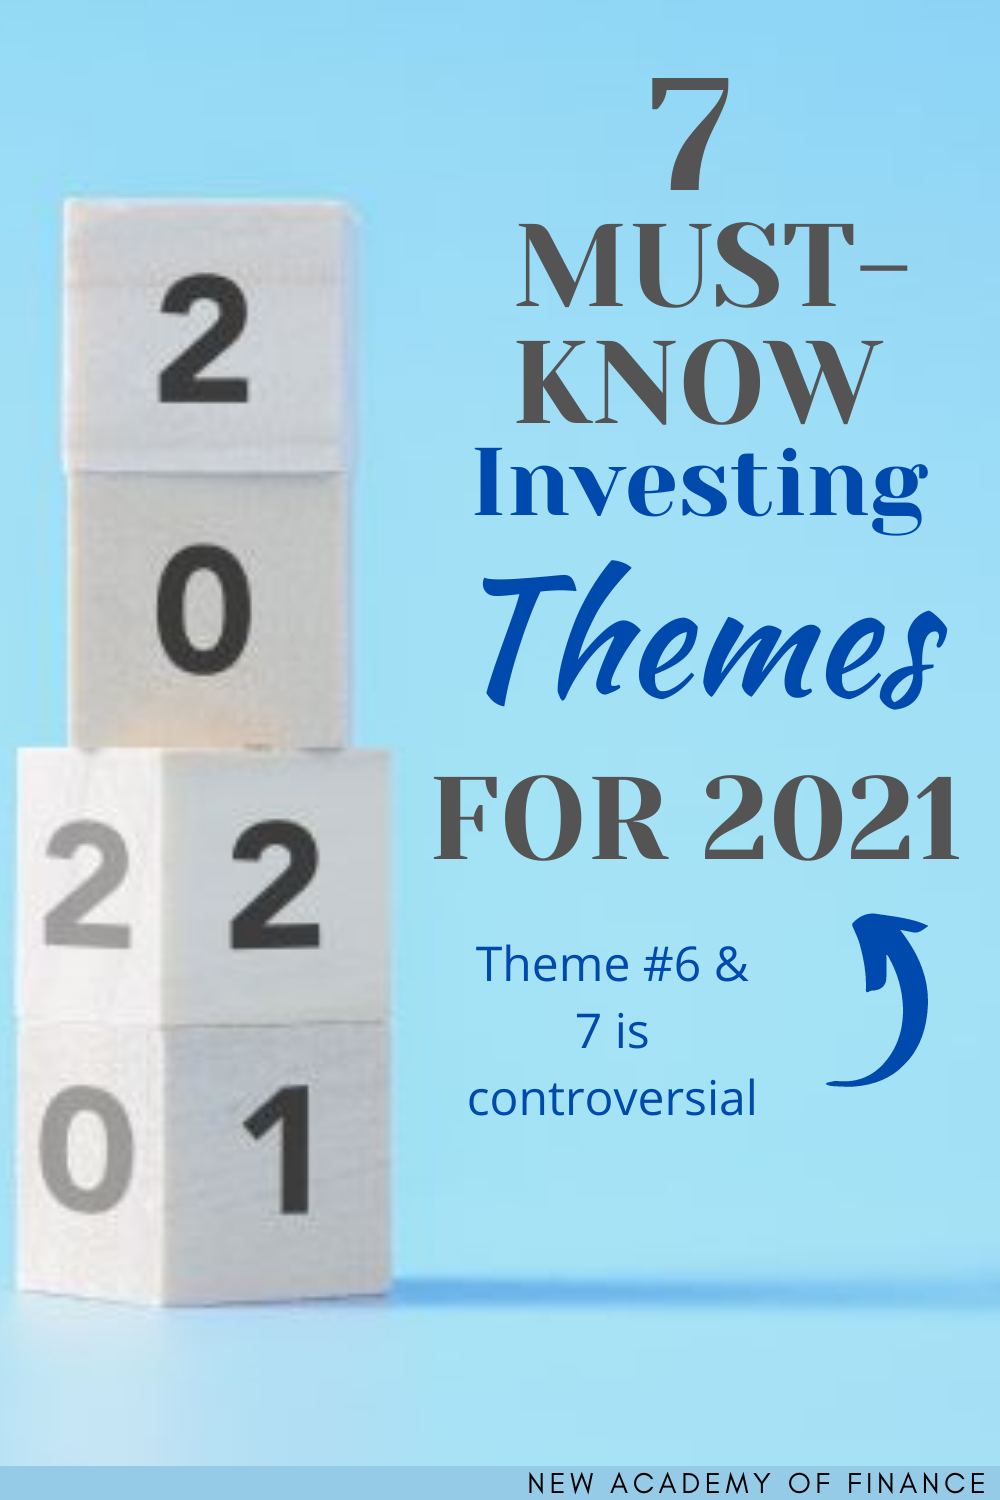 where to invest in 2021